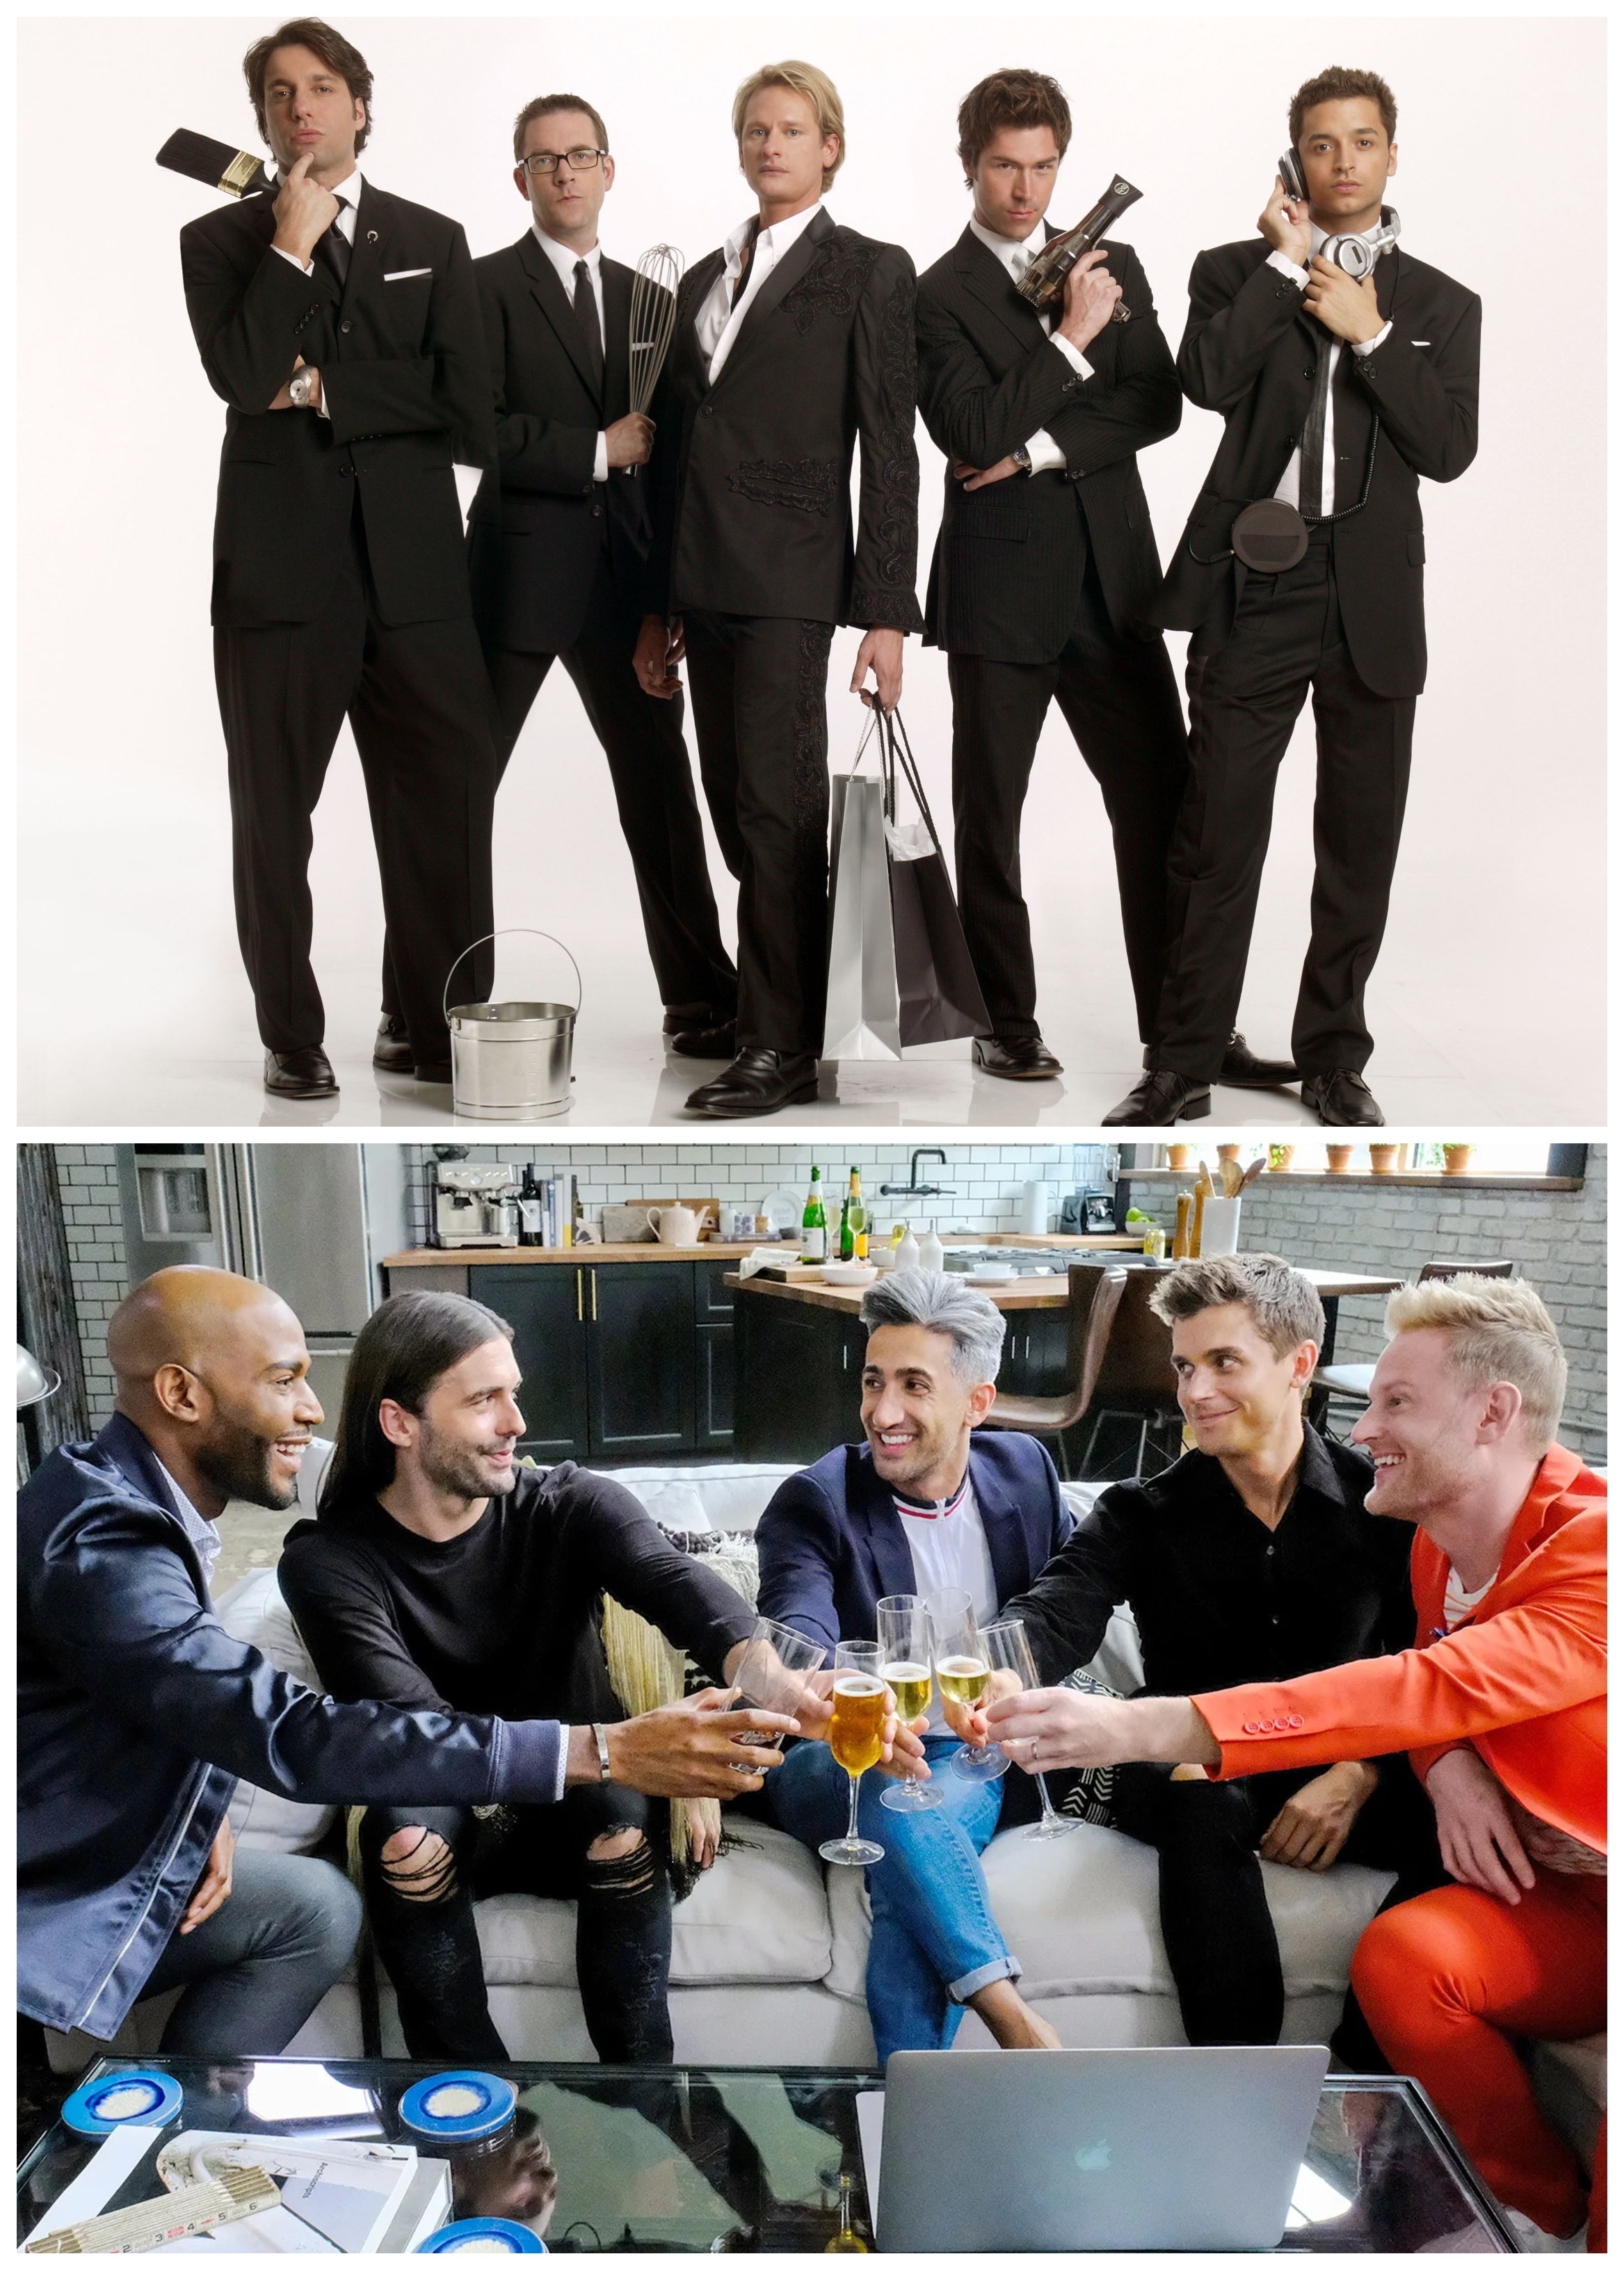 Top: The original Queer Eye cast; Bottom: The new Queer Eye cast doing a toast with champagne